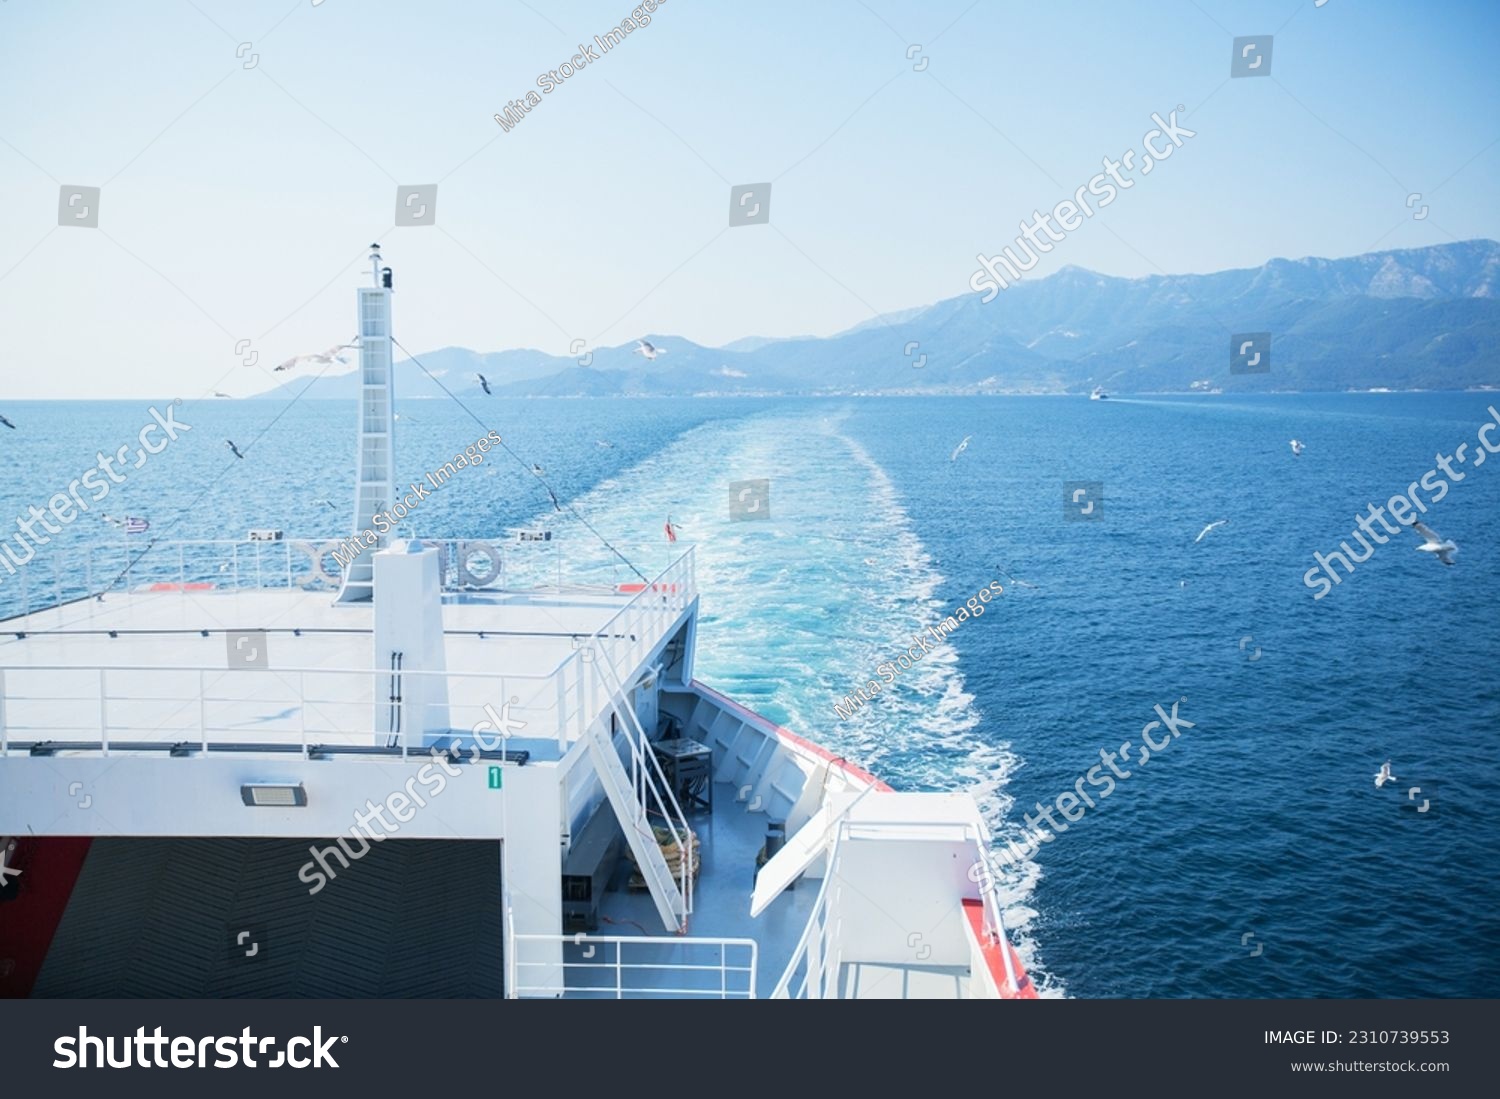 Summer seascape with seagulls flying around ferry. Sea water waves trails from ferry boat. View from the ferries. Sunny clear blue sky. Mountain landscape of Thassos, Greece.	 #2310739553